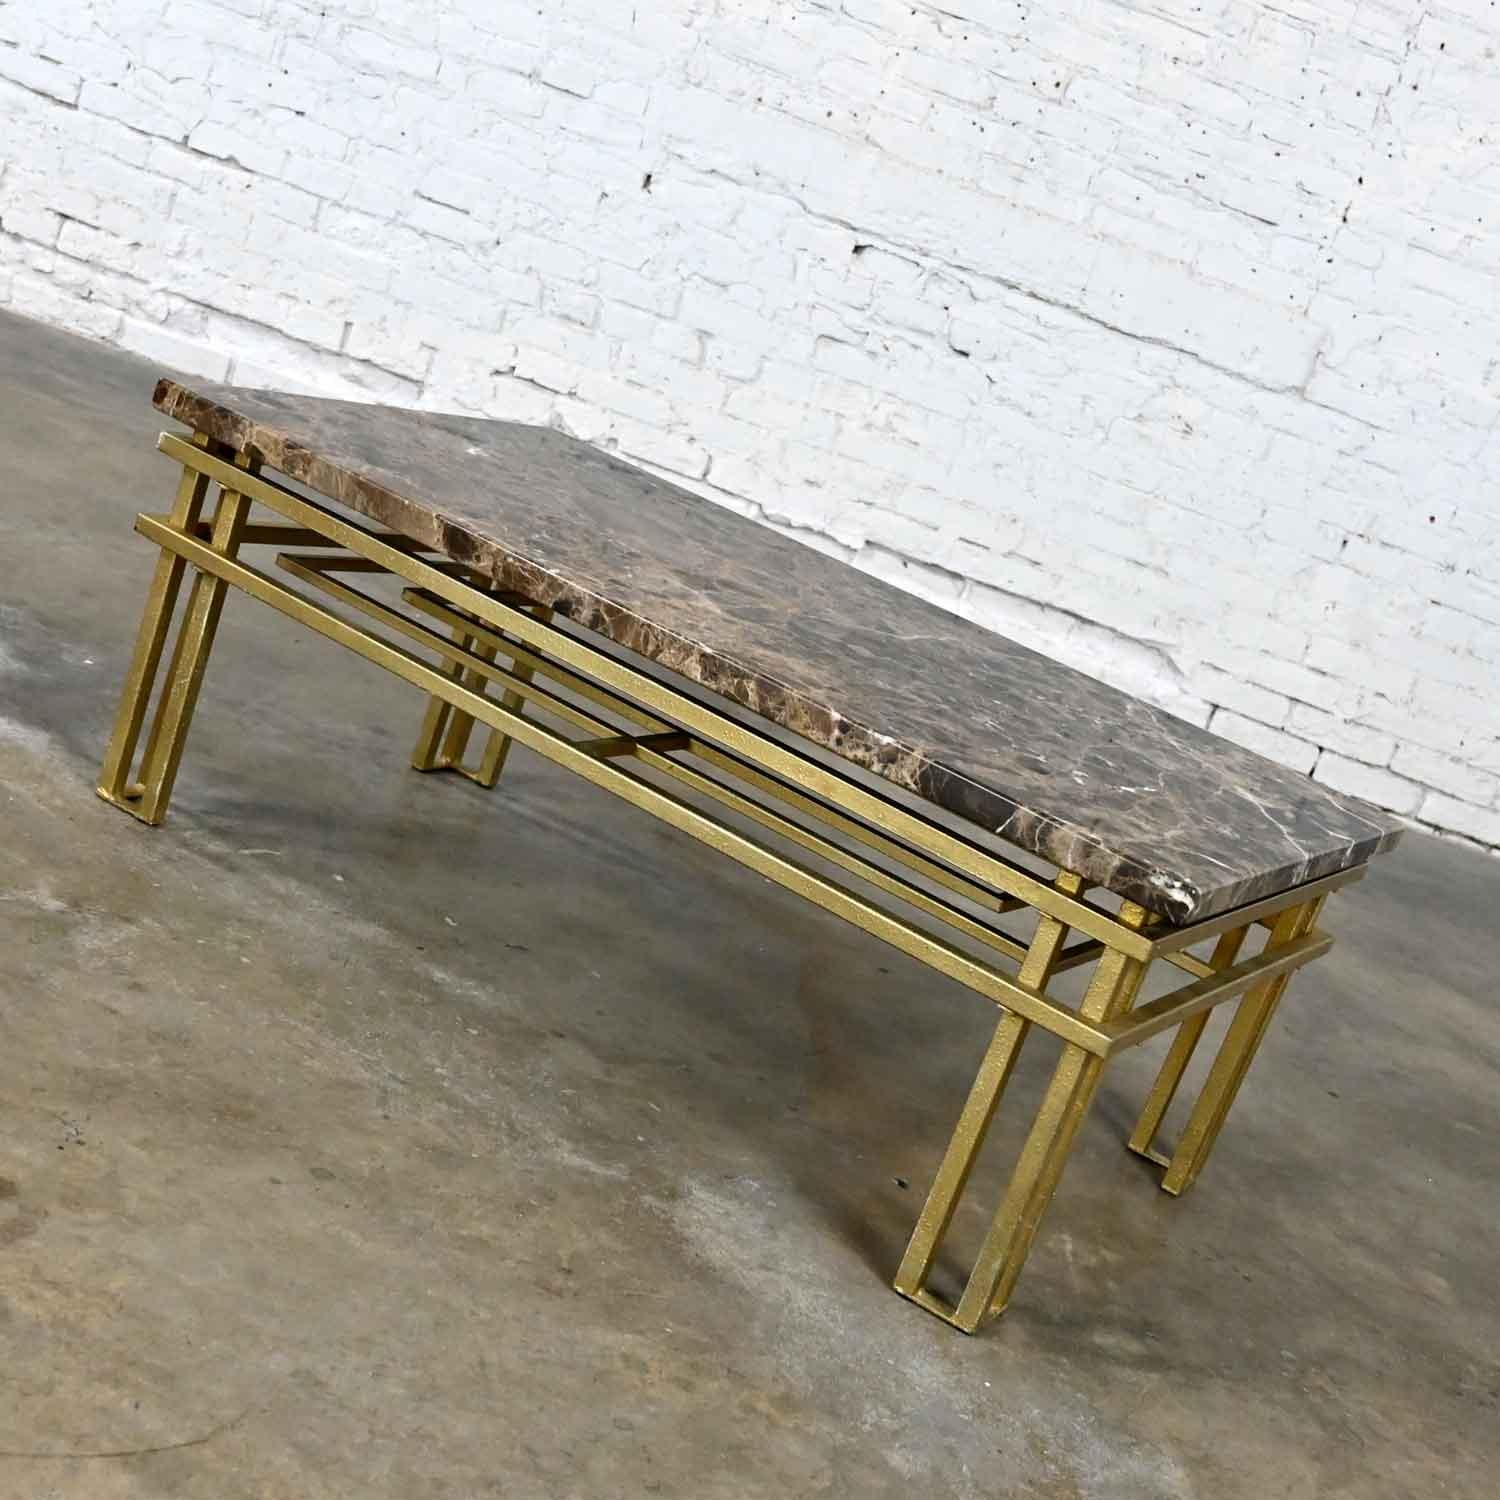 Stunning Art Deco style gold painted steel tube coffee table with rectangle glass or brown marble top. Beautiful condition, keeping in mind that this is vintage and not new so will have signs of use and wear. Some nicks have been touched up on the